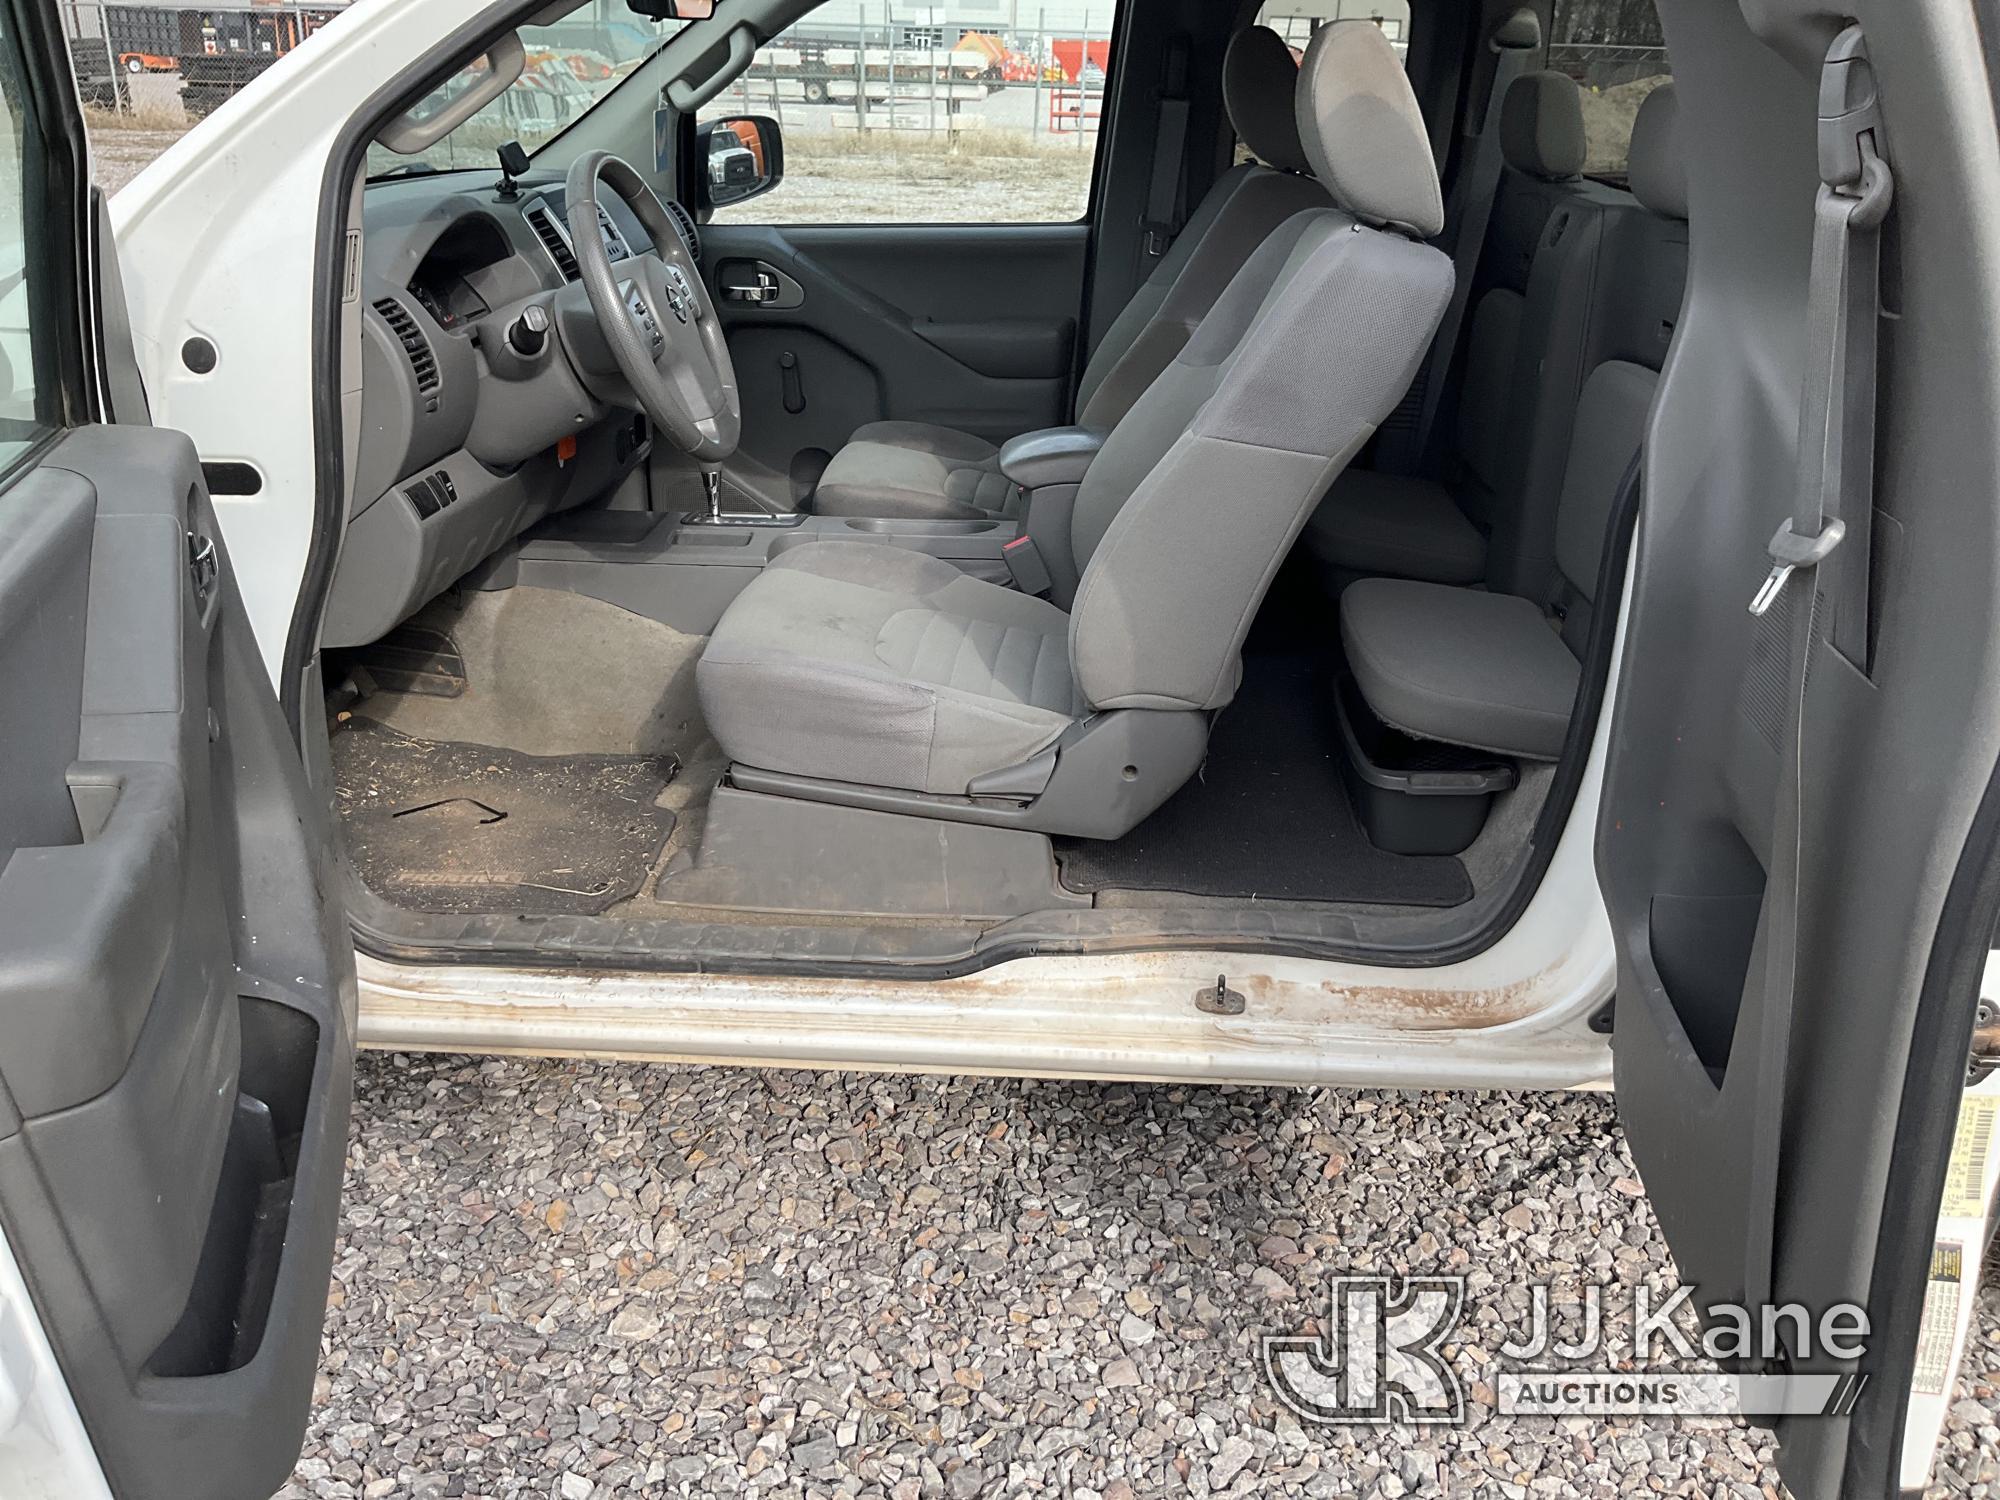 (Oklahoma City, OK) 2015 Nissan Frontier Extended-Cab Pickup Truck Runs & Moves With Jump-pack Conne